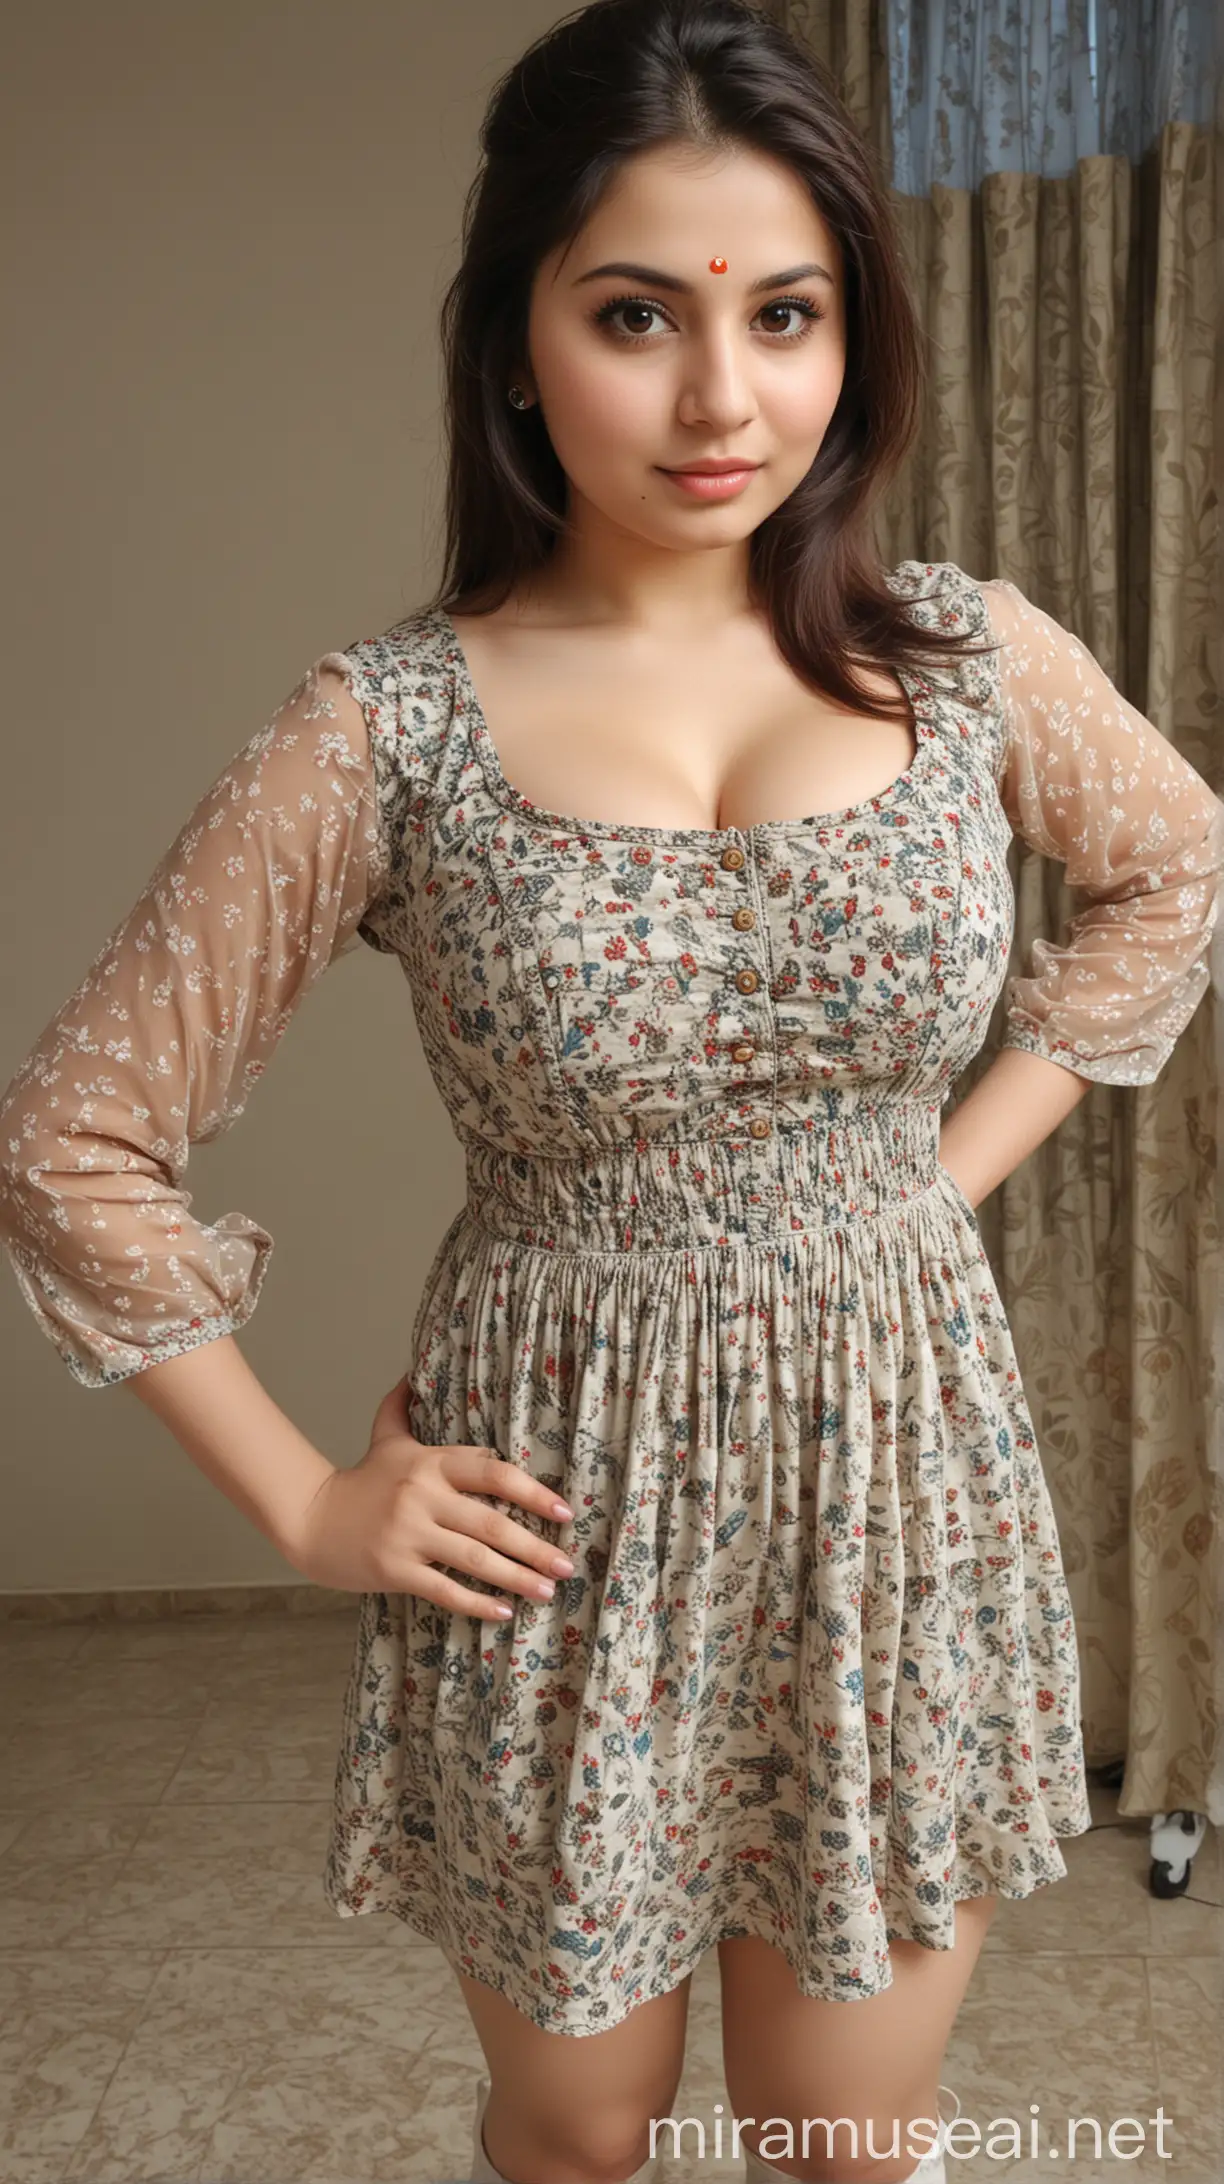 Cute face,,extreme big boobs,,extreme big Butt,, slim waist,,fair face,,white skin,,full body photo,,facing the camera,,very small size frock,,Pakistani girl,,